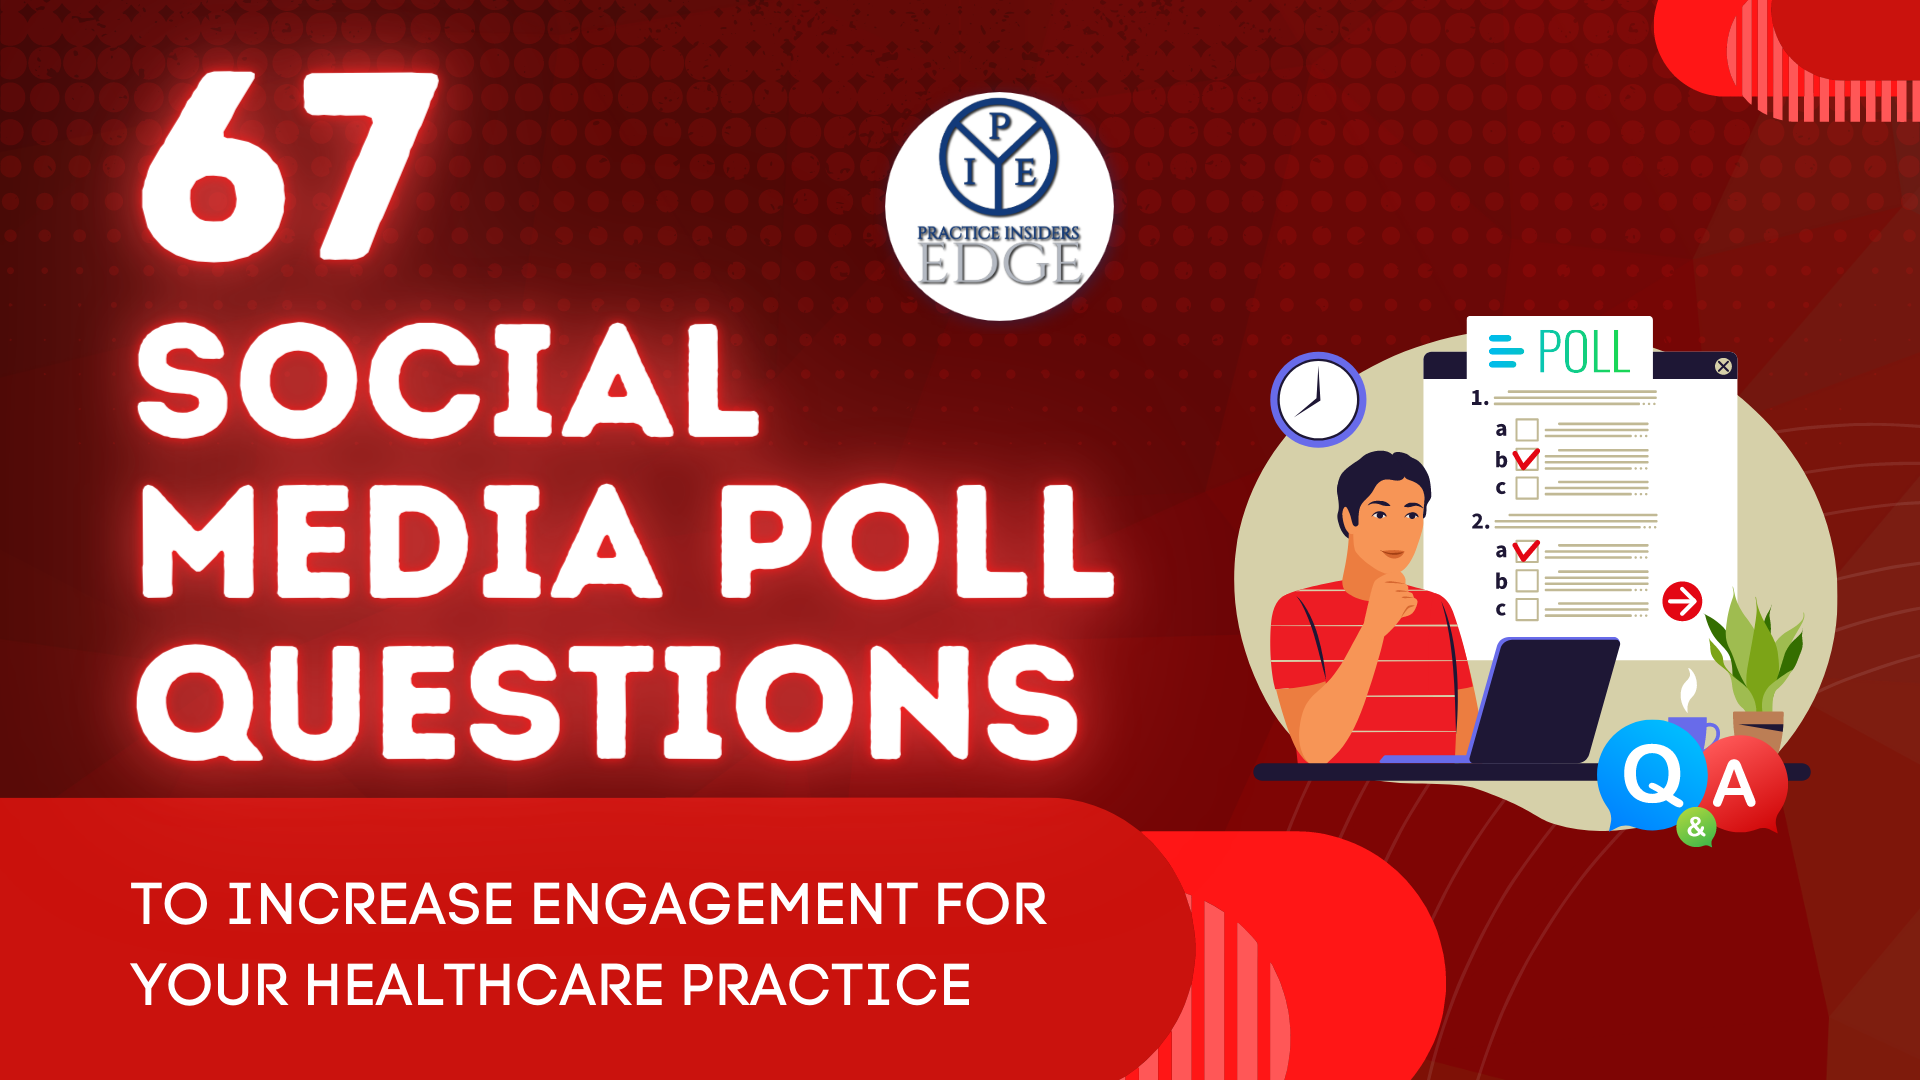 67 Social Media Poll Questions To Increase Engagement for Your Local Practice